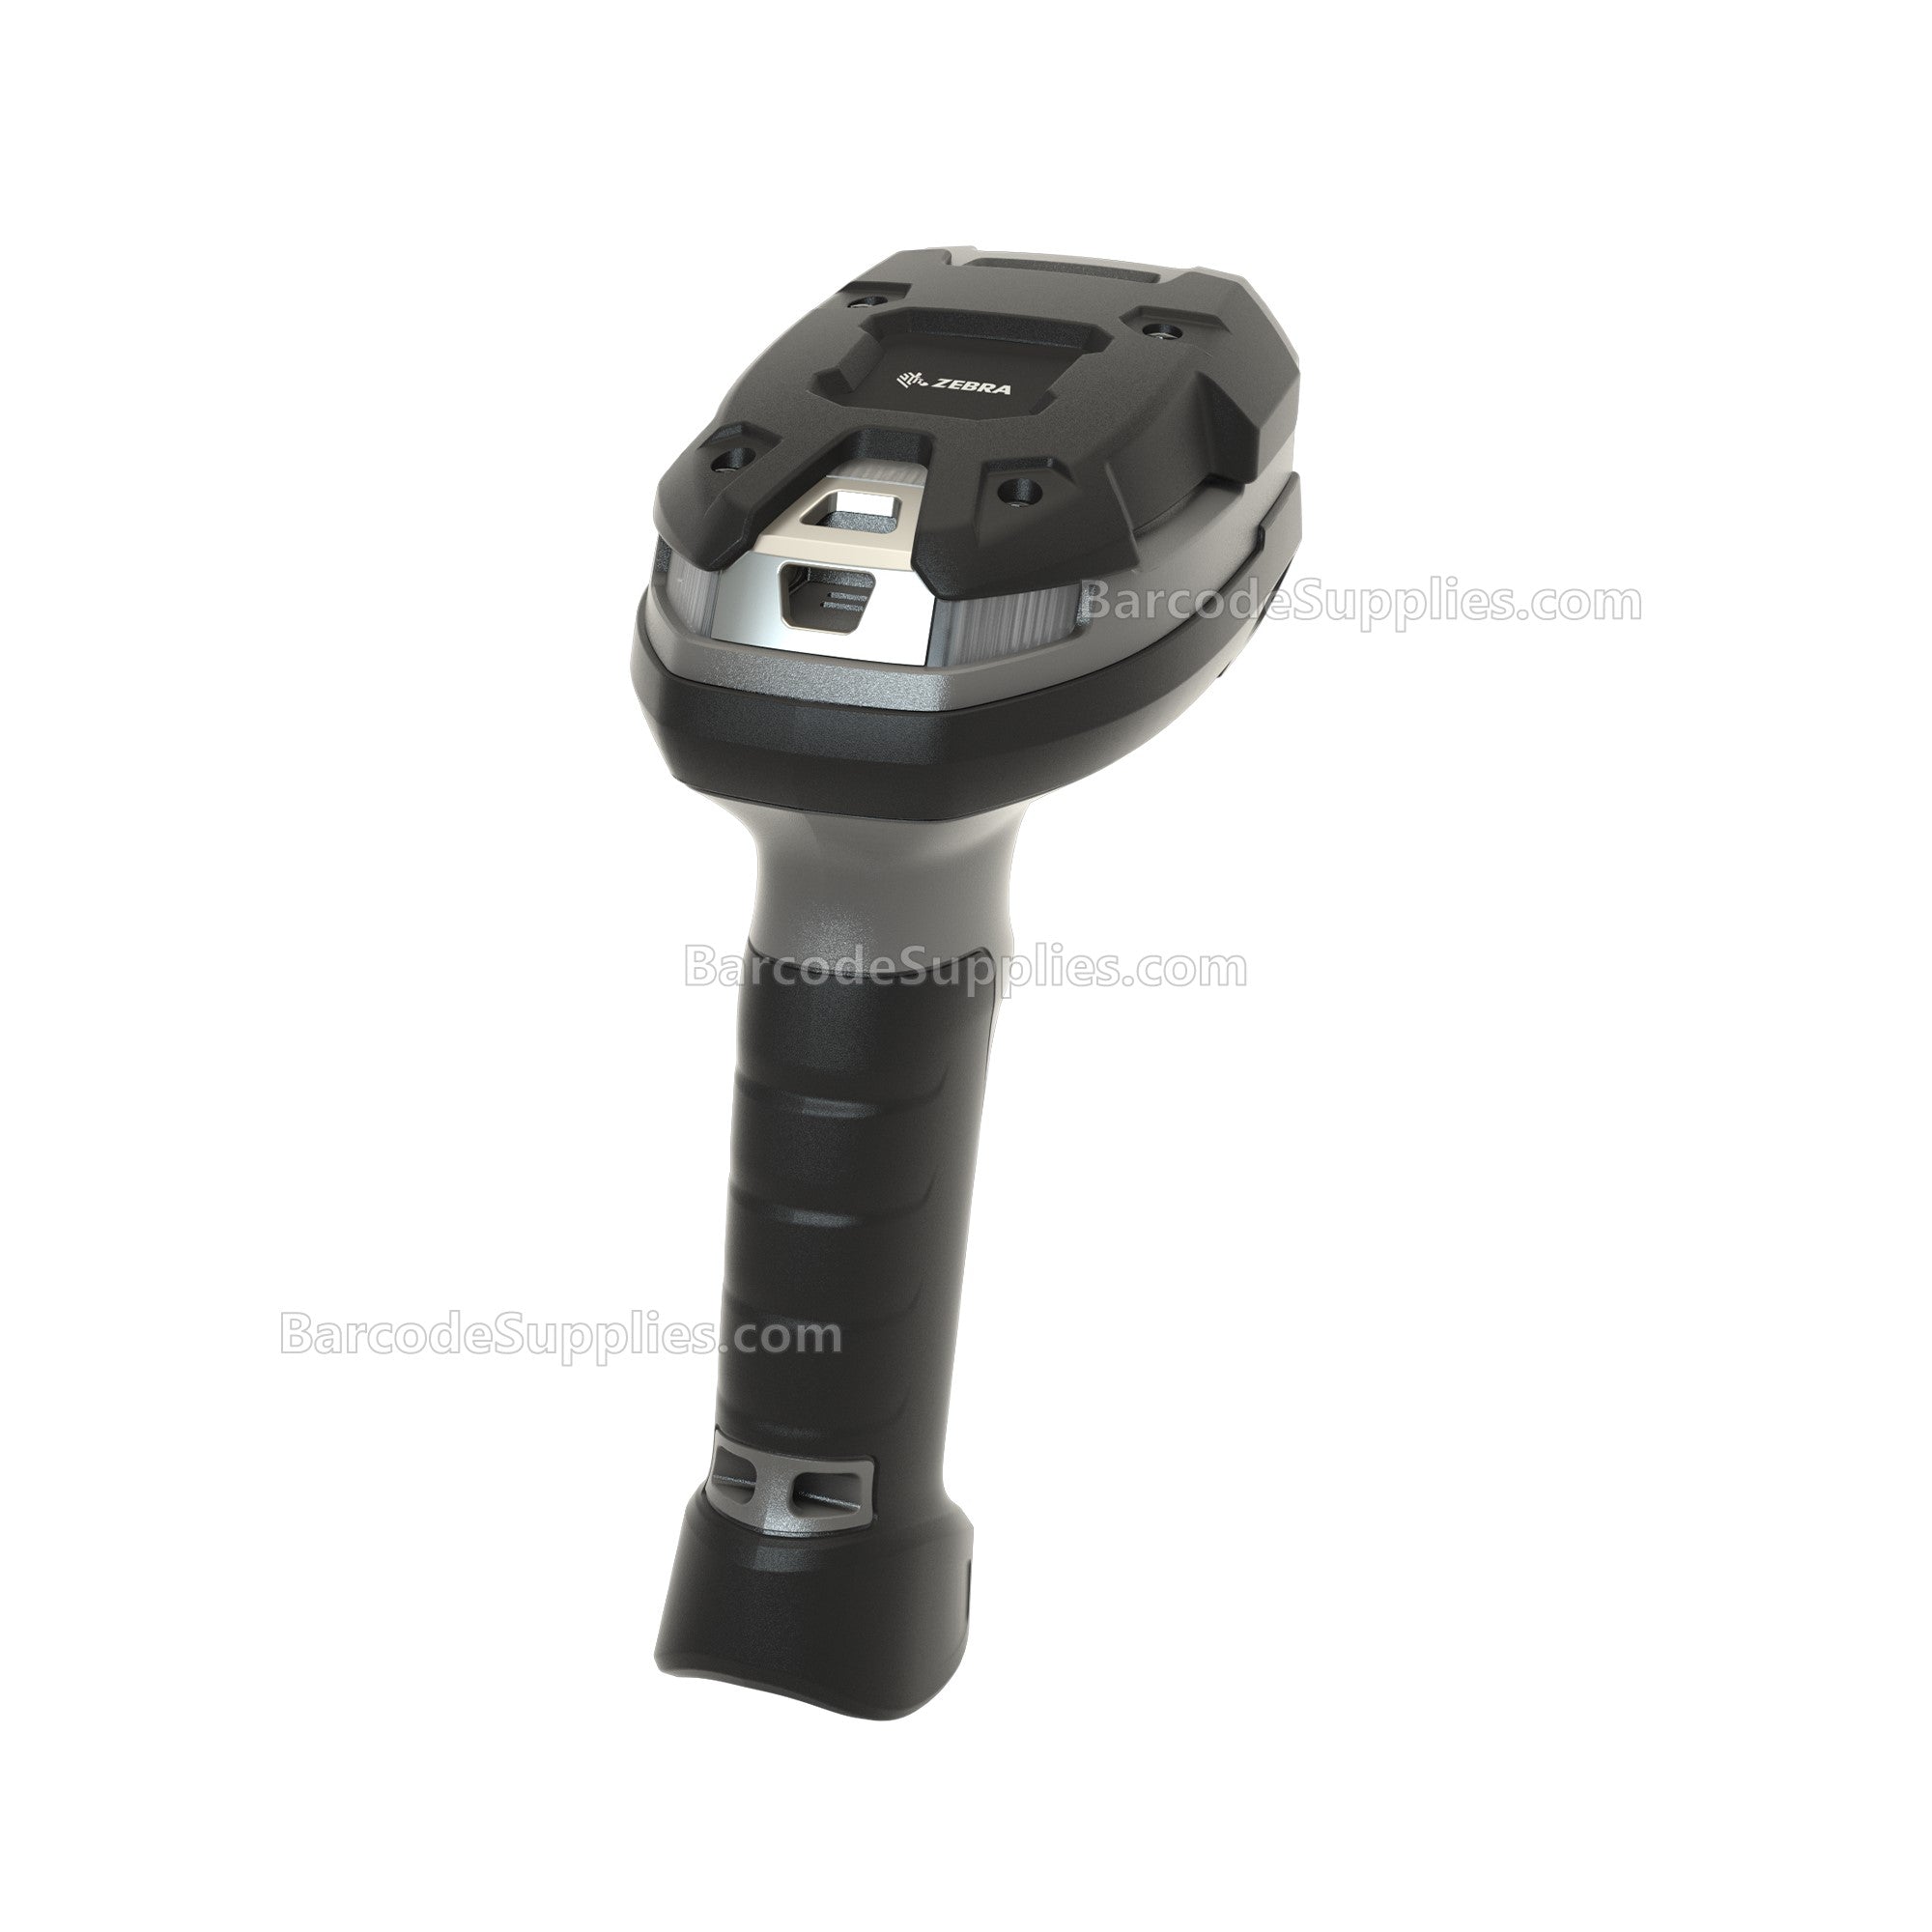 Zebra DS3678: RUGGED, AREA IMAGER, DIRECT PART MARK, INDUSTRIAL FOCUS, CORDLESS, FIPS, GRAY, VIBRATION MOTOR